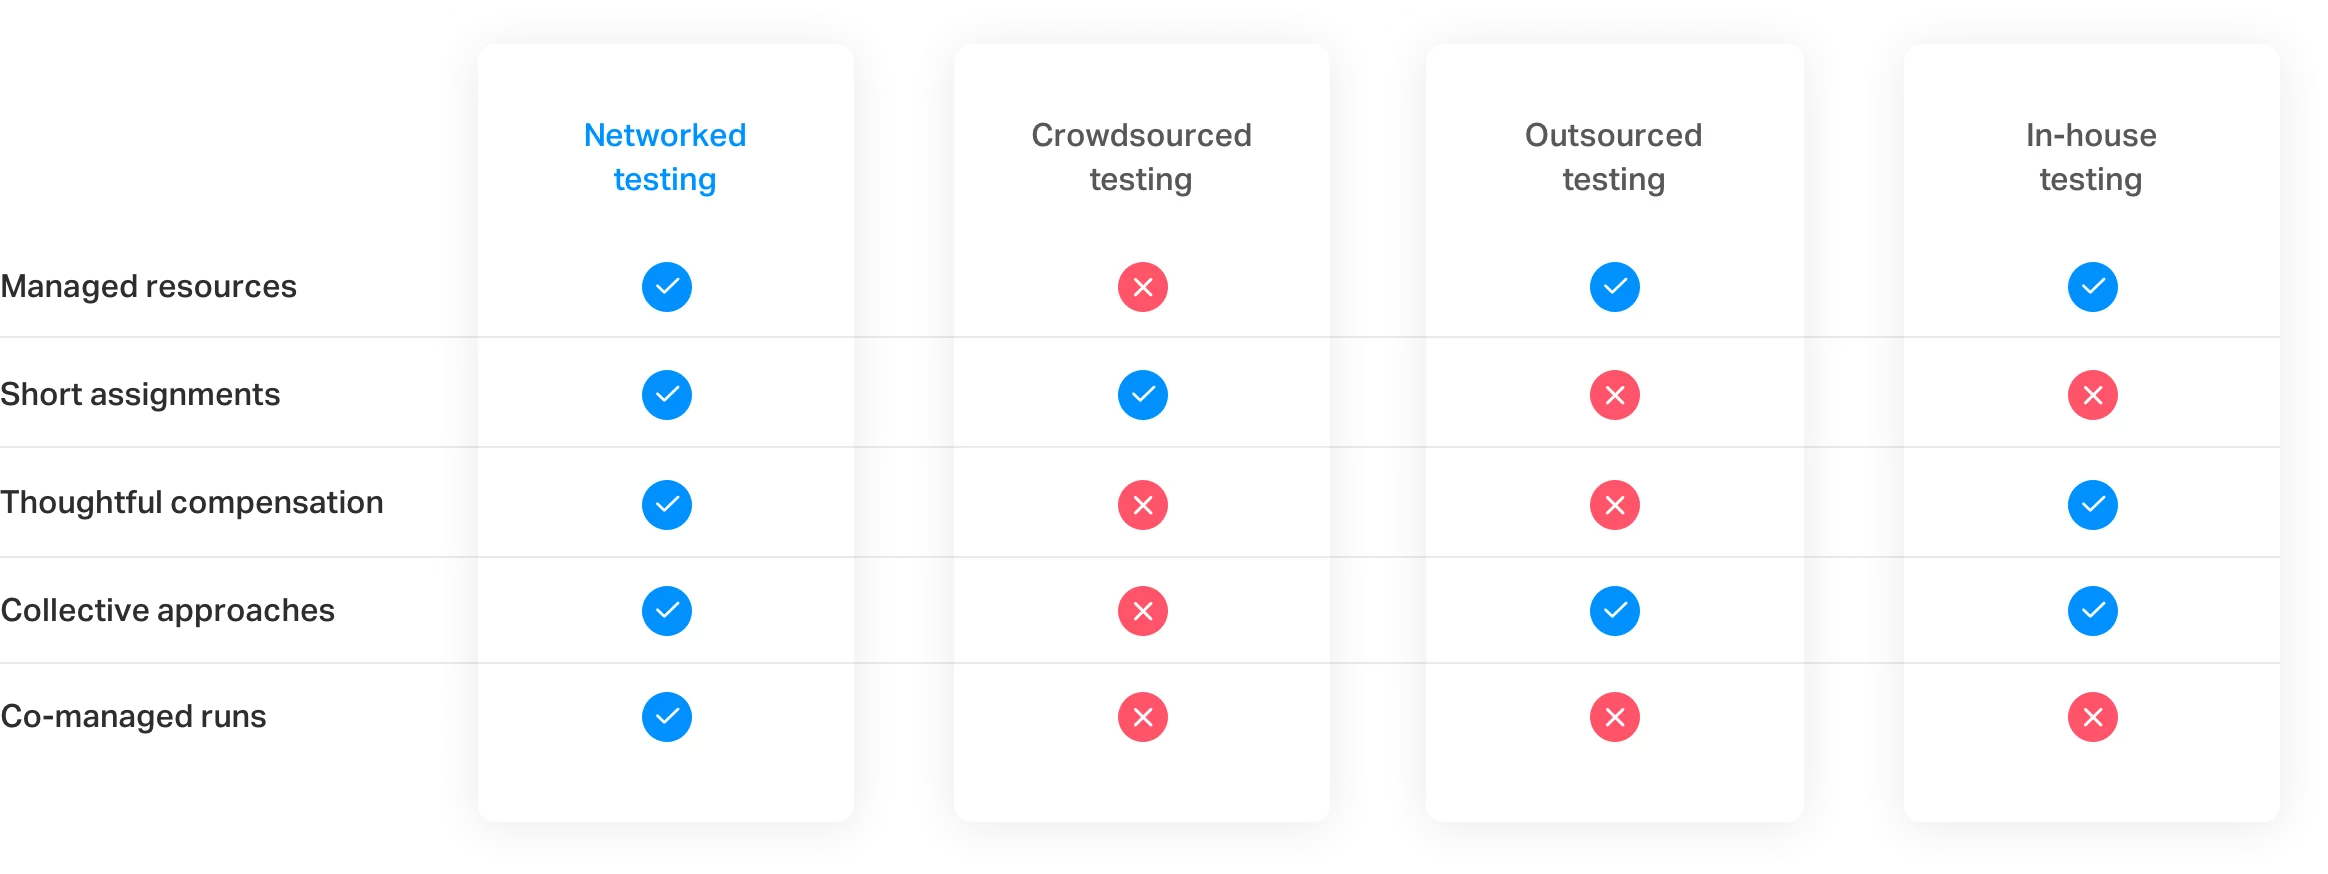 Networked testing uses collective methods, tuned management, shared tasks, and short assignments to optimize testing efficiency, and effectiveness.